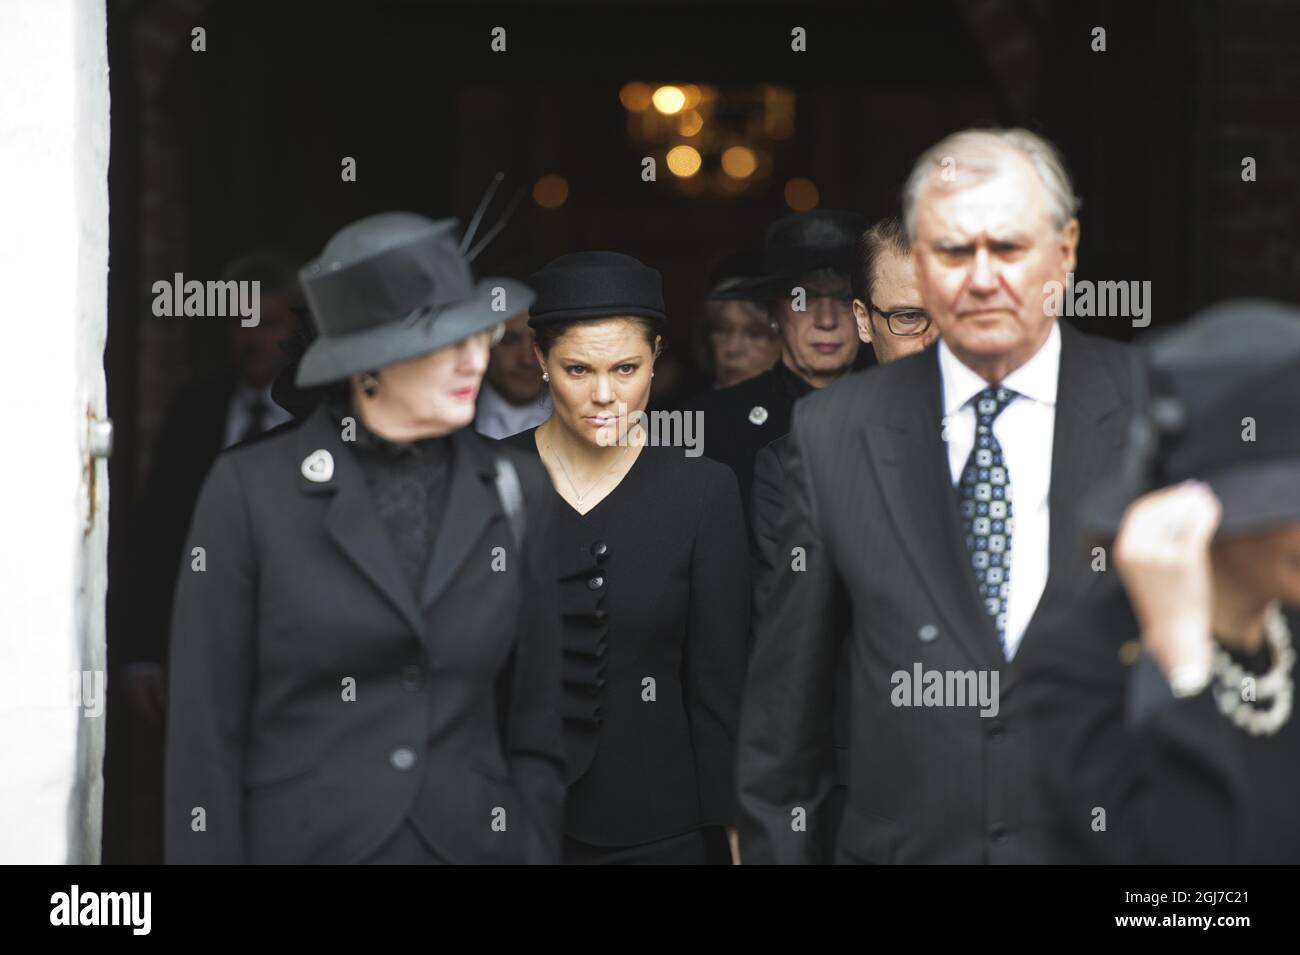 BASTAD 2012-05-14 Crown Princess Victoria is seen between Queen Margreth and Prince Consort Henrik of Denmark during the funeral of Count Carl Johan Bernadotte in the Maria Church in Bastad, Sweden, May 14, 2012. Foto: Suvad Mrkonjic / XP / SCANPIX / kod 7116 ** OUT SWEDEN OUT T ** Stock Photo